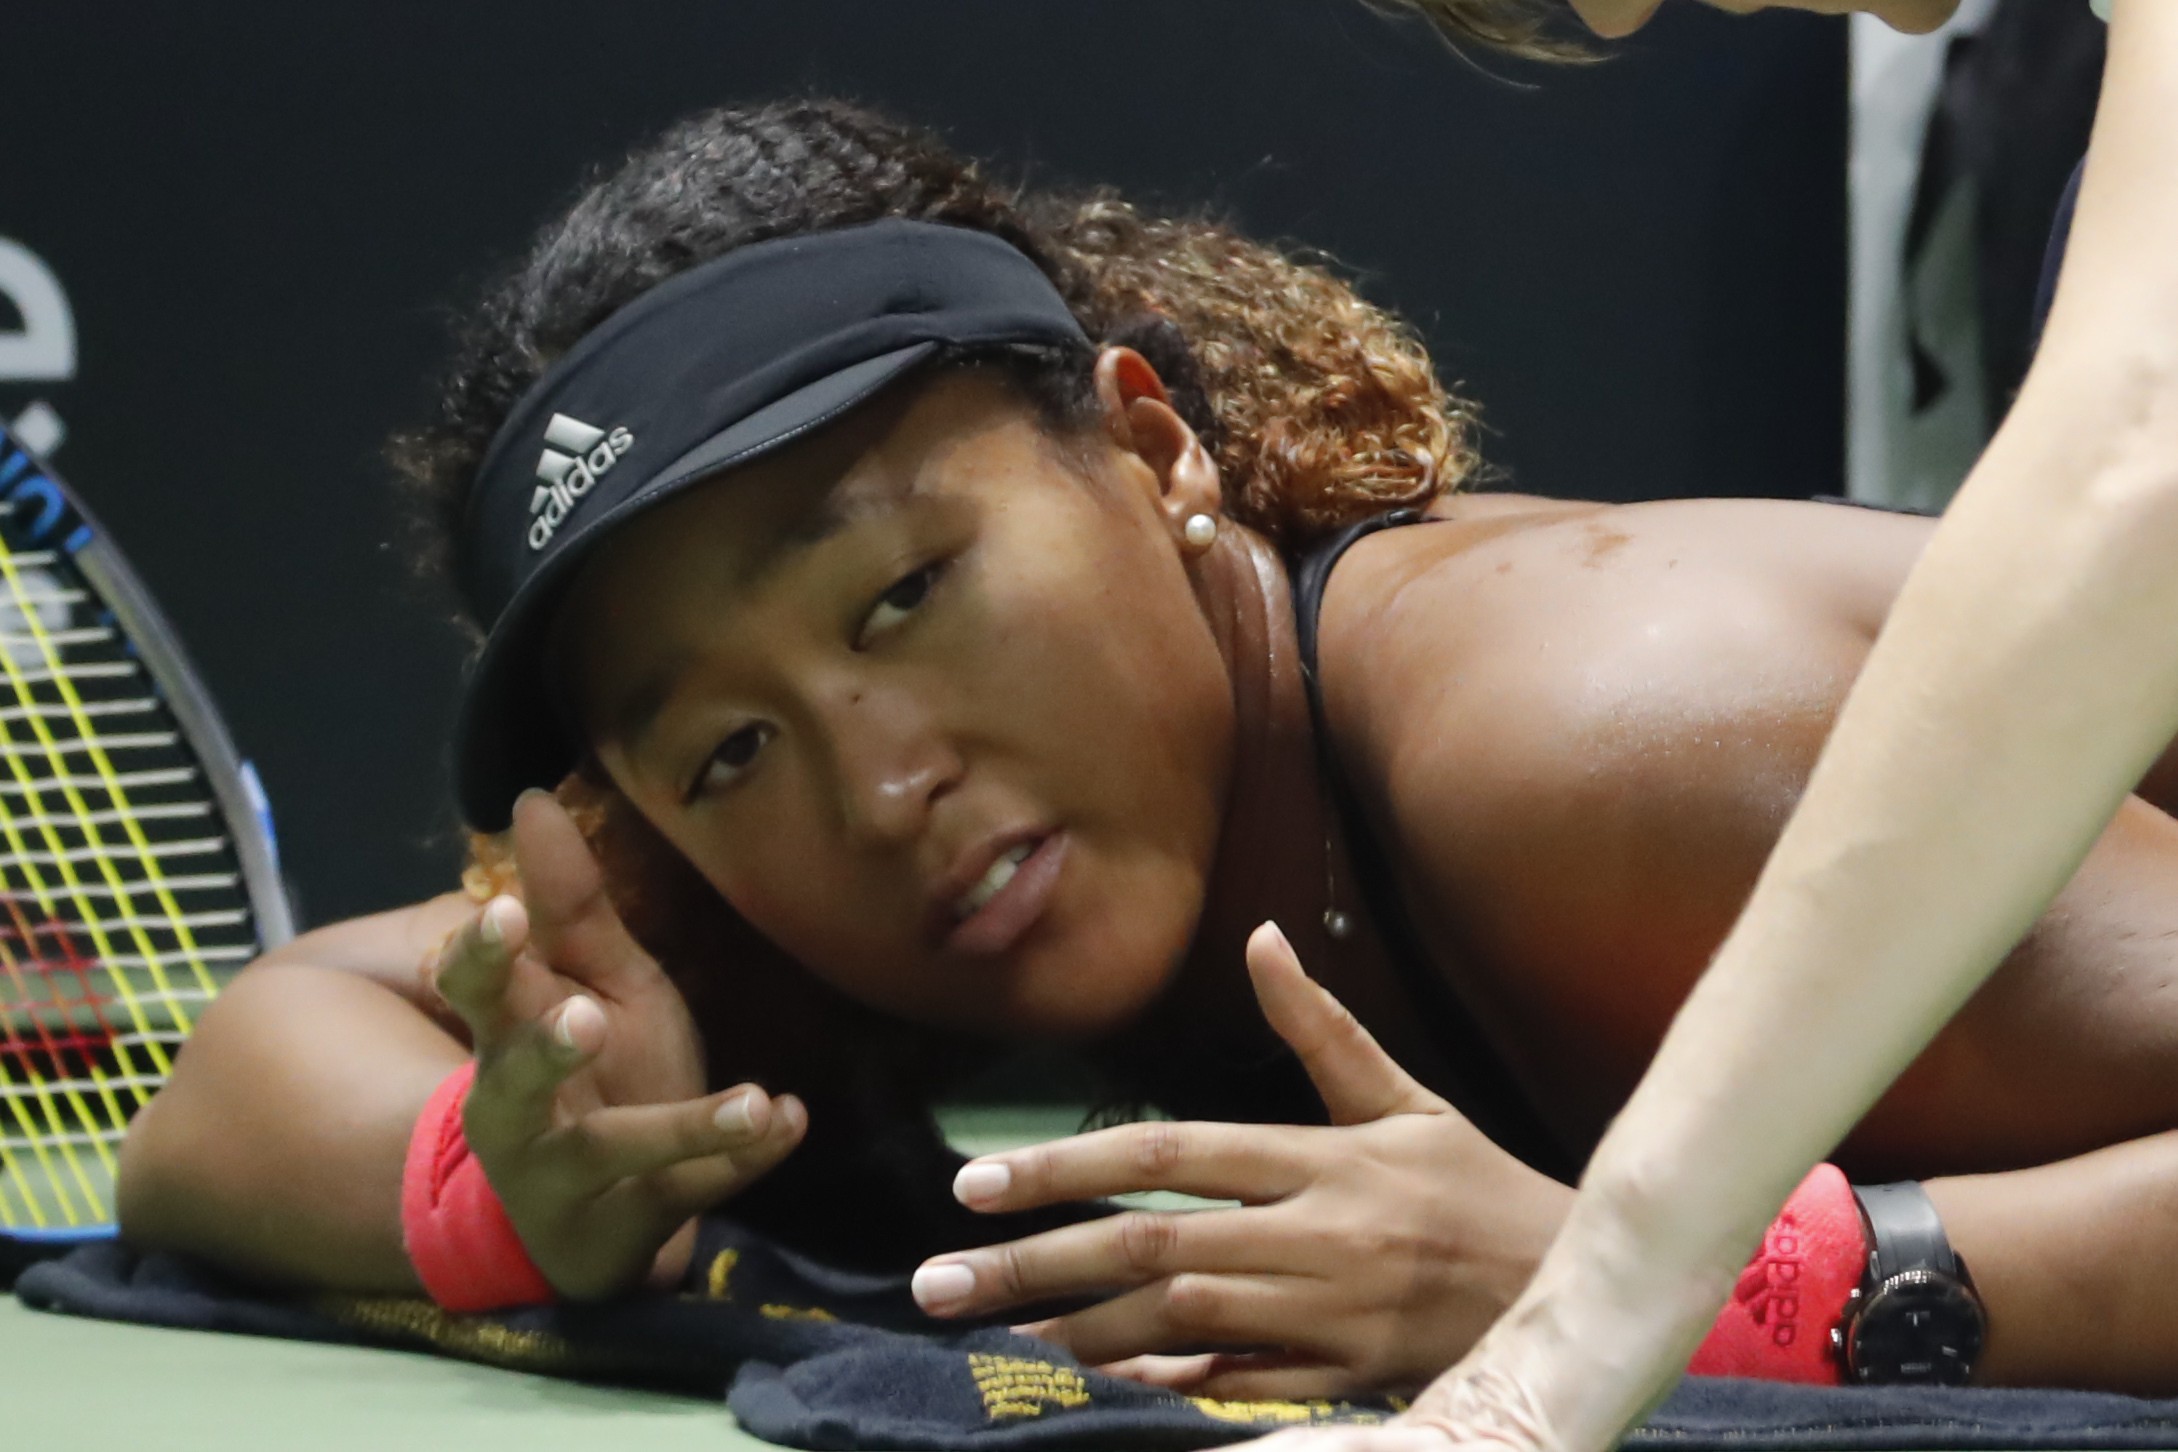 Naomi Osaka receives treatment on the court during a medical timeout against Kiki Bertens at the WTA Finals in Singapore. Photo: AP